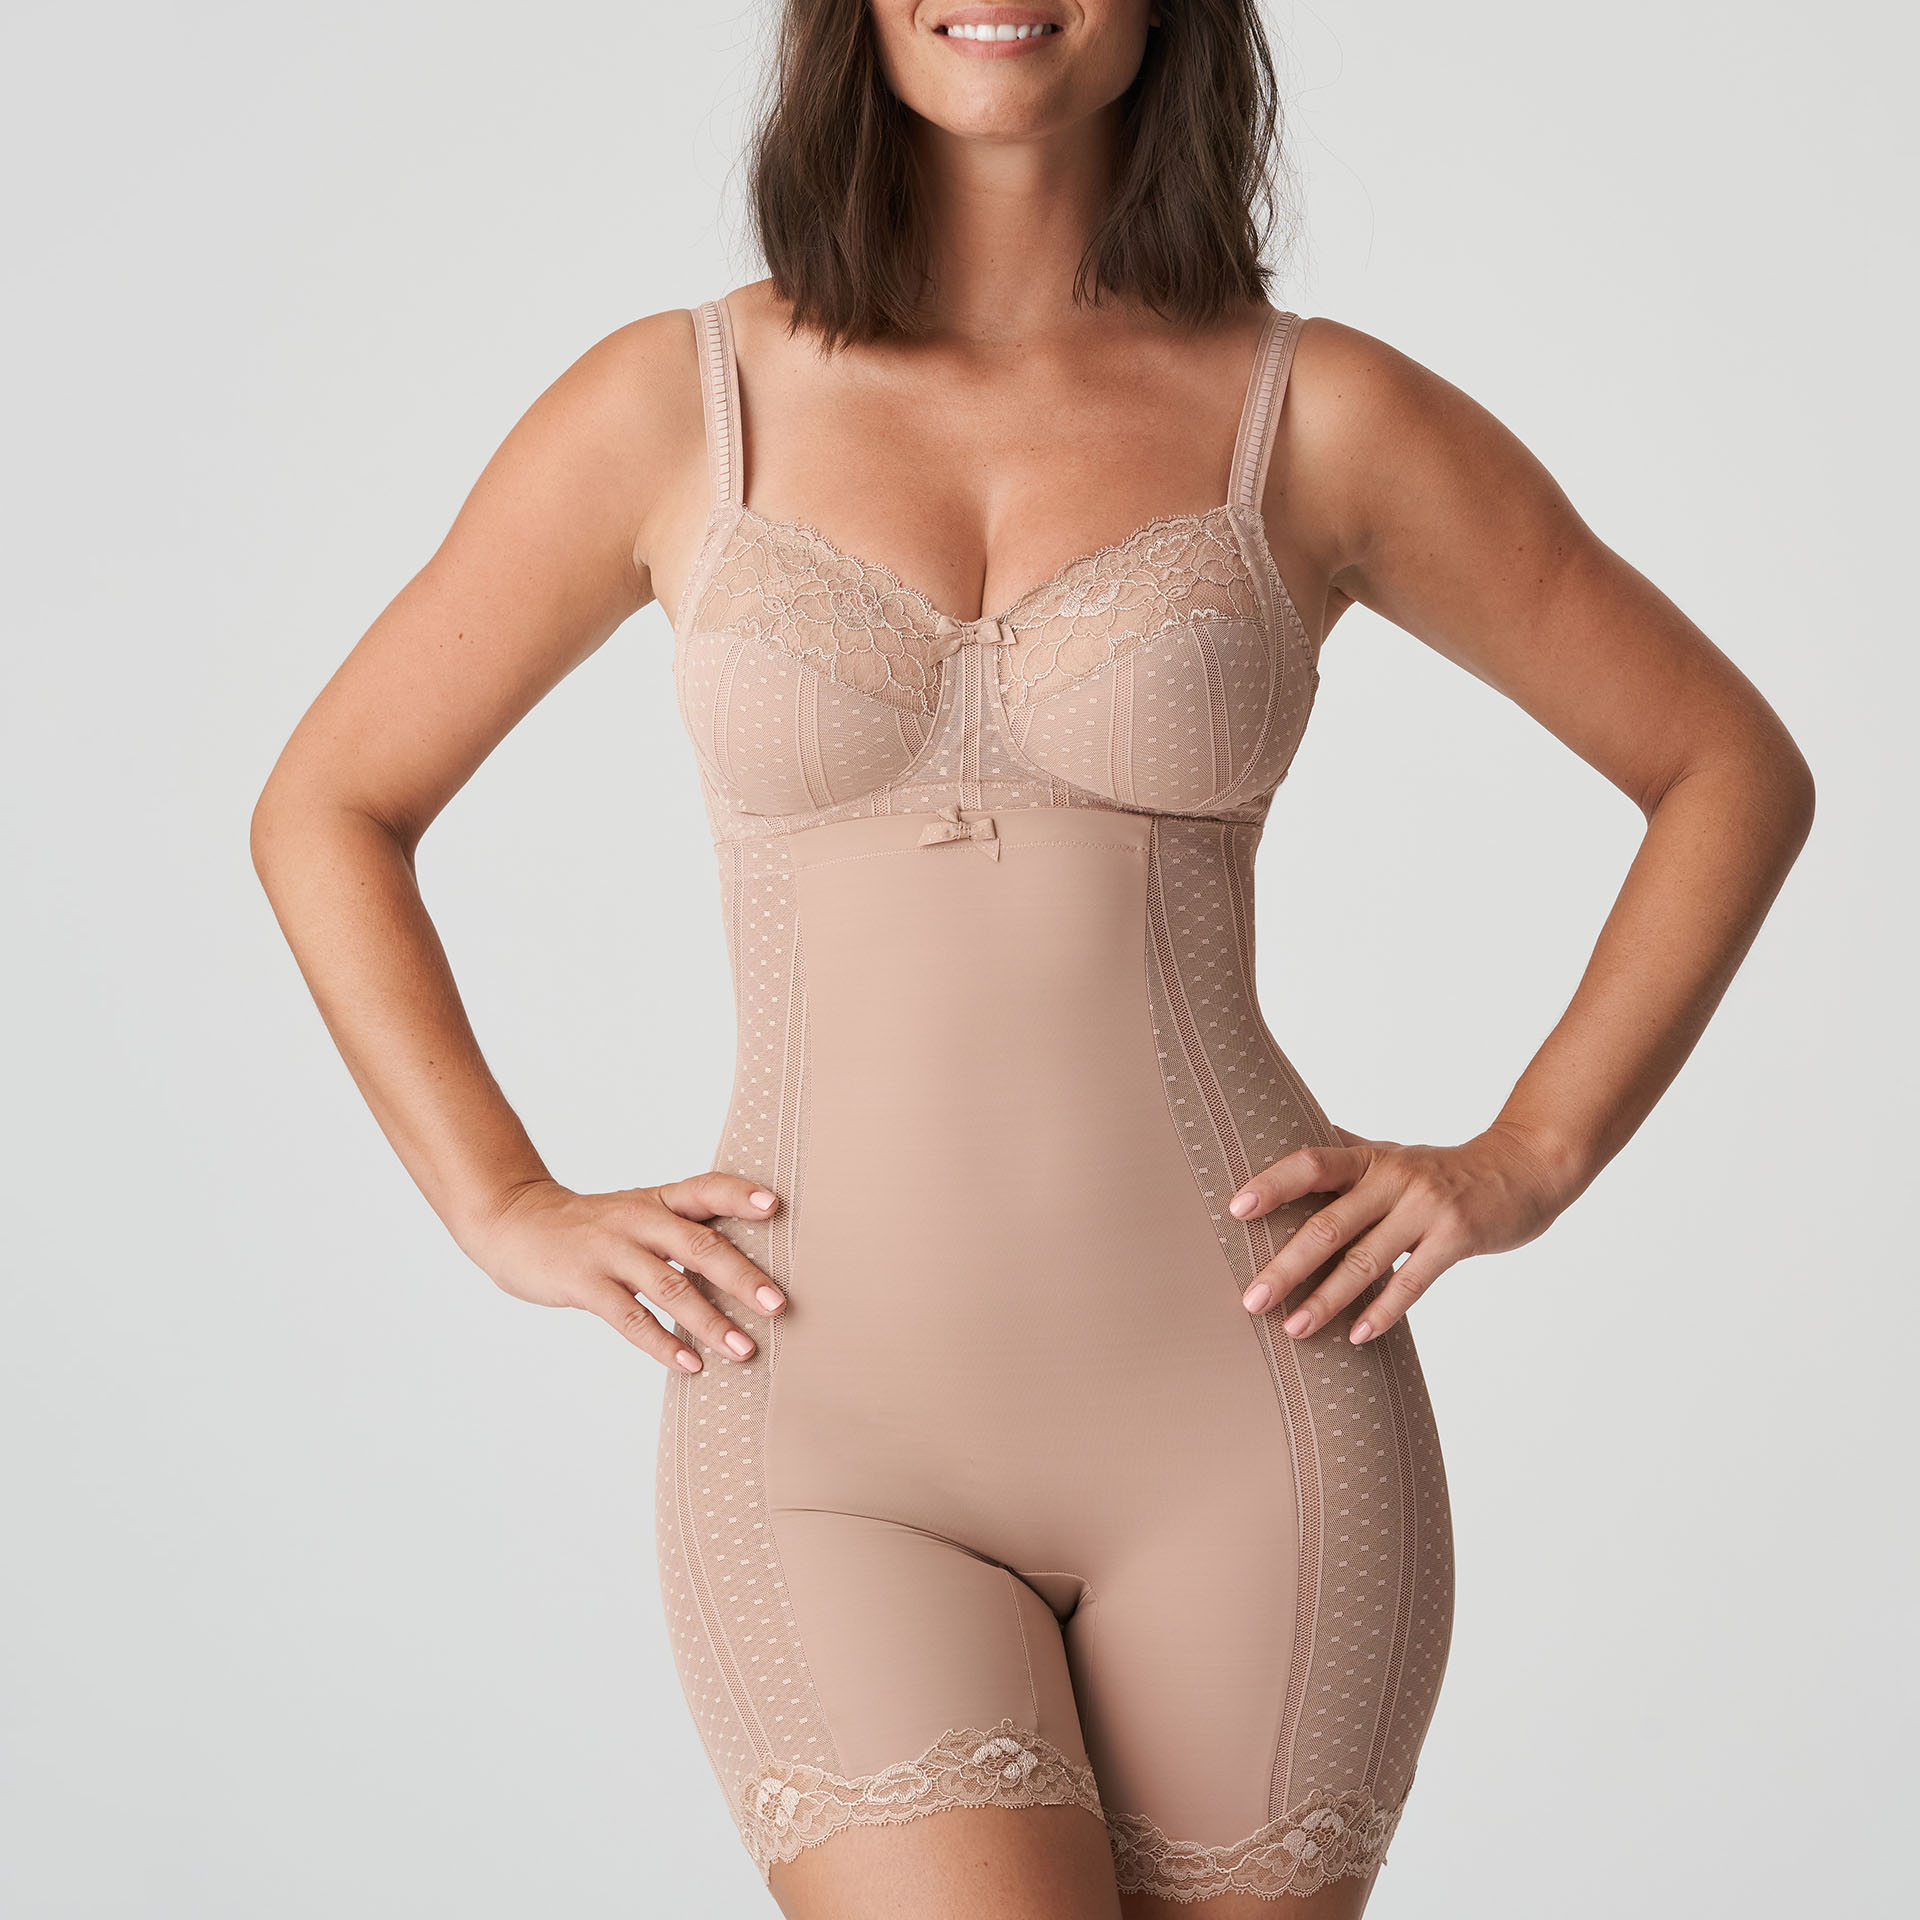 https://images.ctfassets.net/3zzevkhc8io9/7pM7NGjbzysaLVtSNnS7o2/a3591ad16ce95210ad3bcae621eb6e8e/eservices_primadonna-lingerie-bodyshaper-couture-0562585-skin-0_3456289.jpg